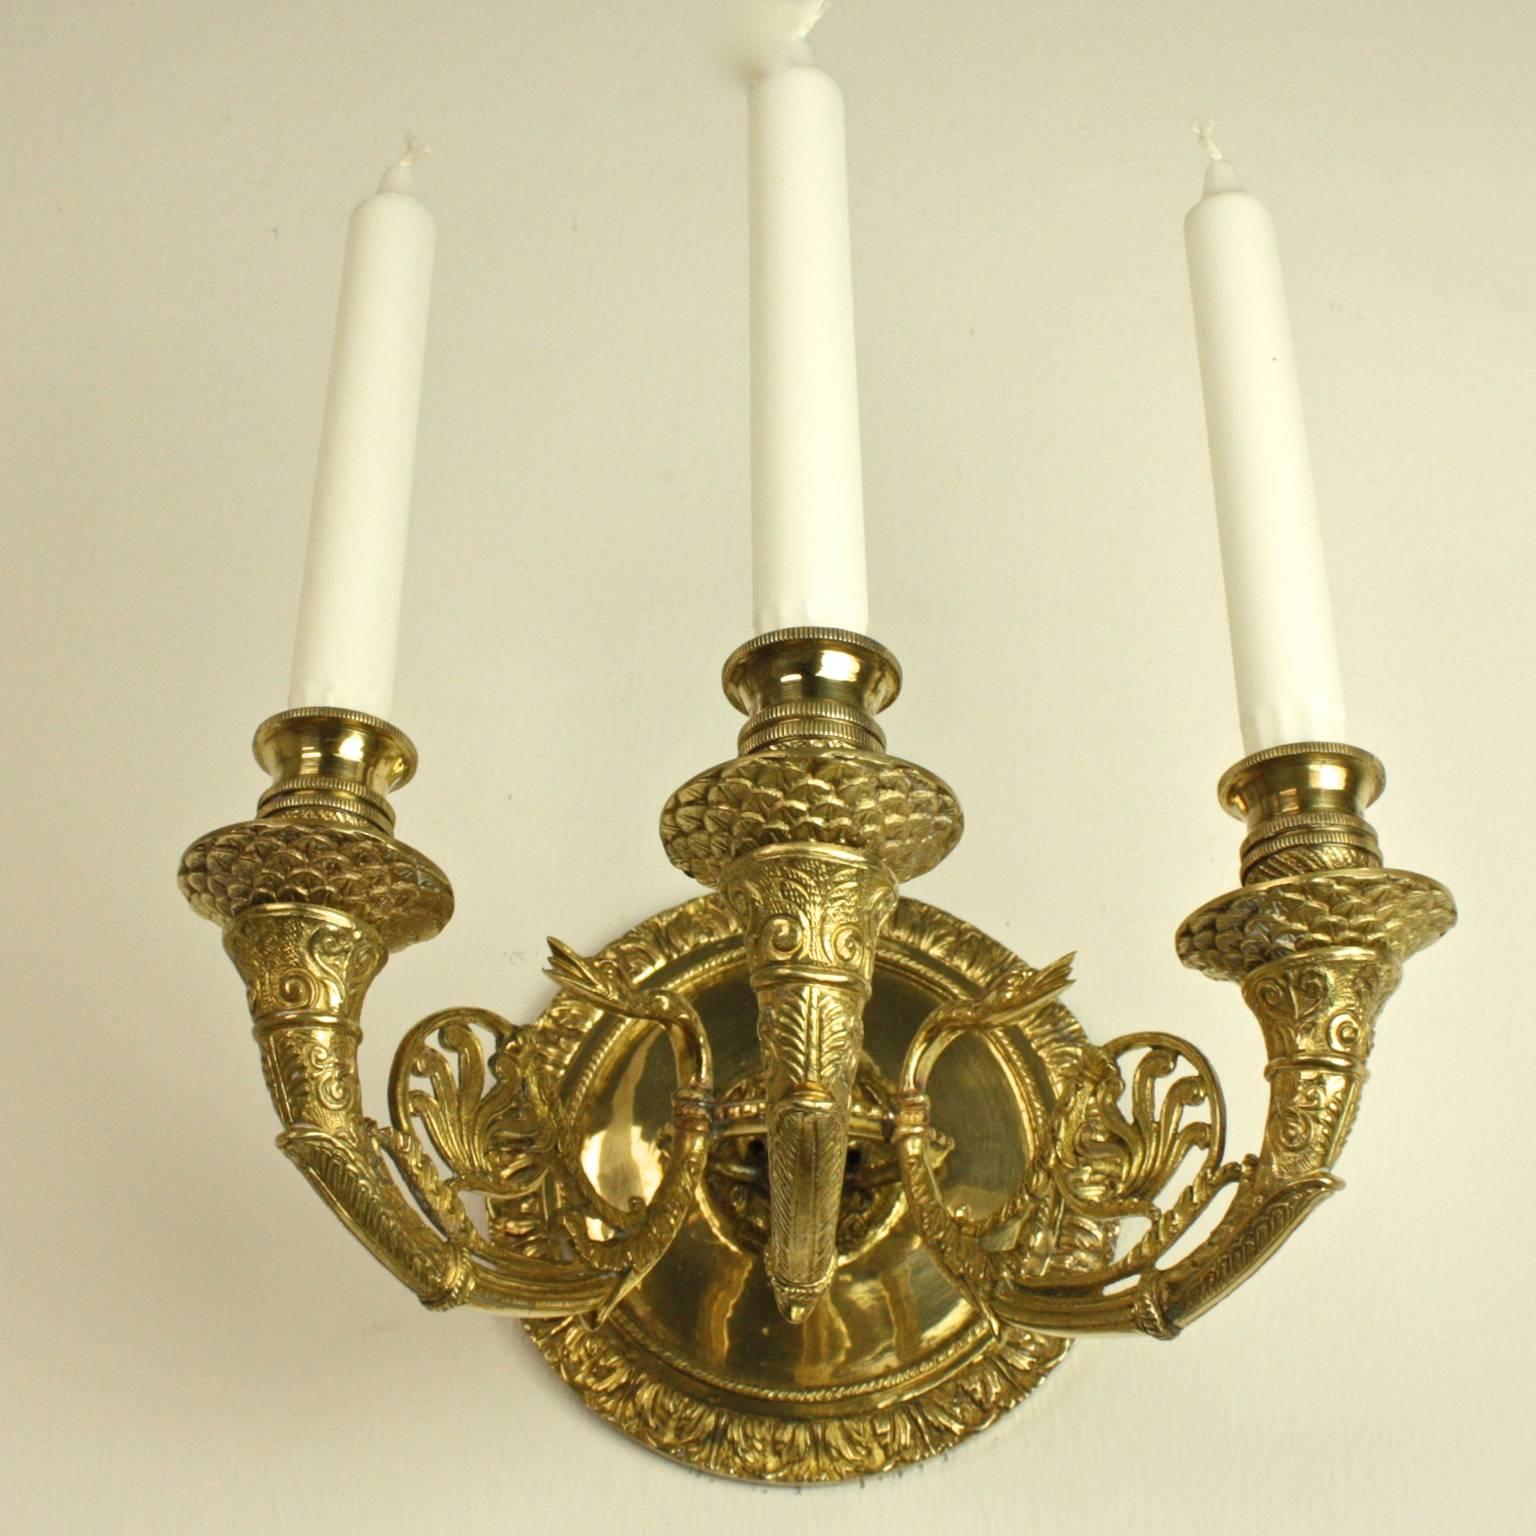 Empire Pair of Probably Russian Three-Branch Wall Lights, circa 1900